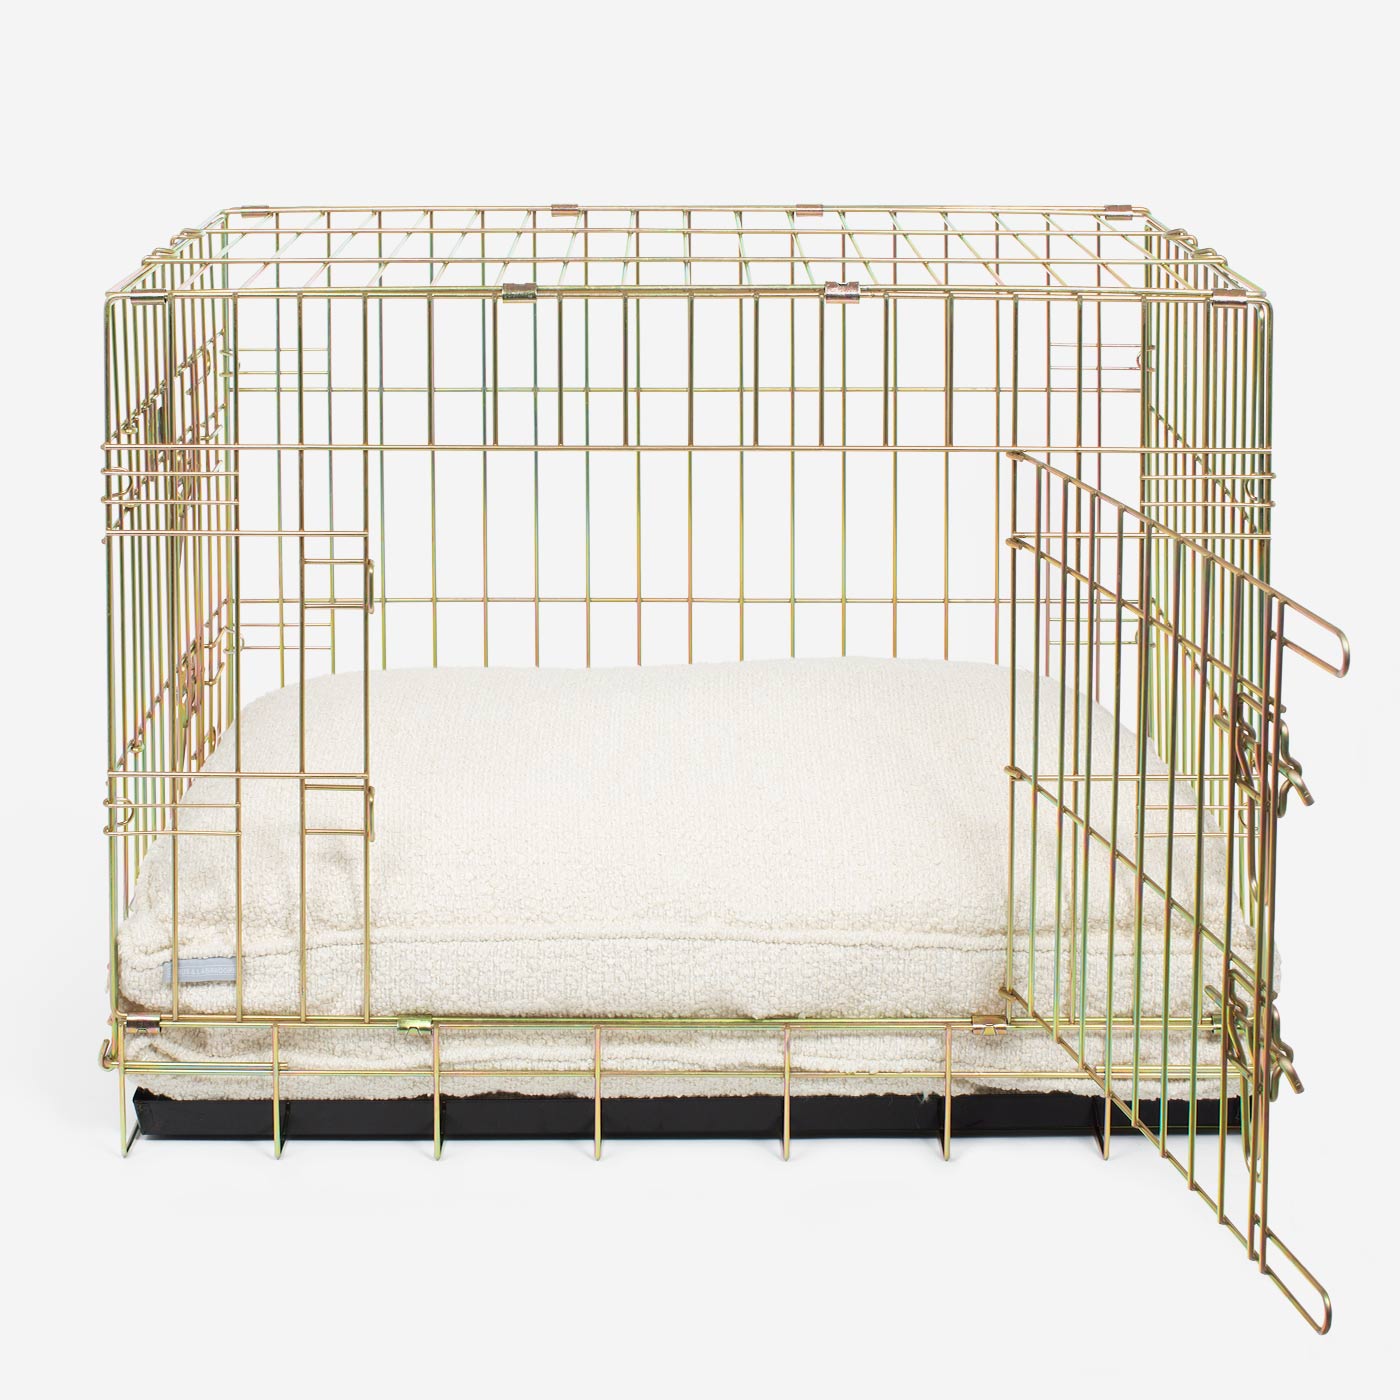 Luxury Dog Crate Cushion, Ivory Bouclé Crate Cushion The Perfect Dog Crate Accessory, Available To Personalise Now at Lords & Labradors